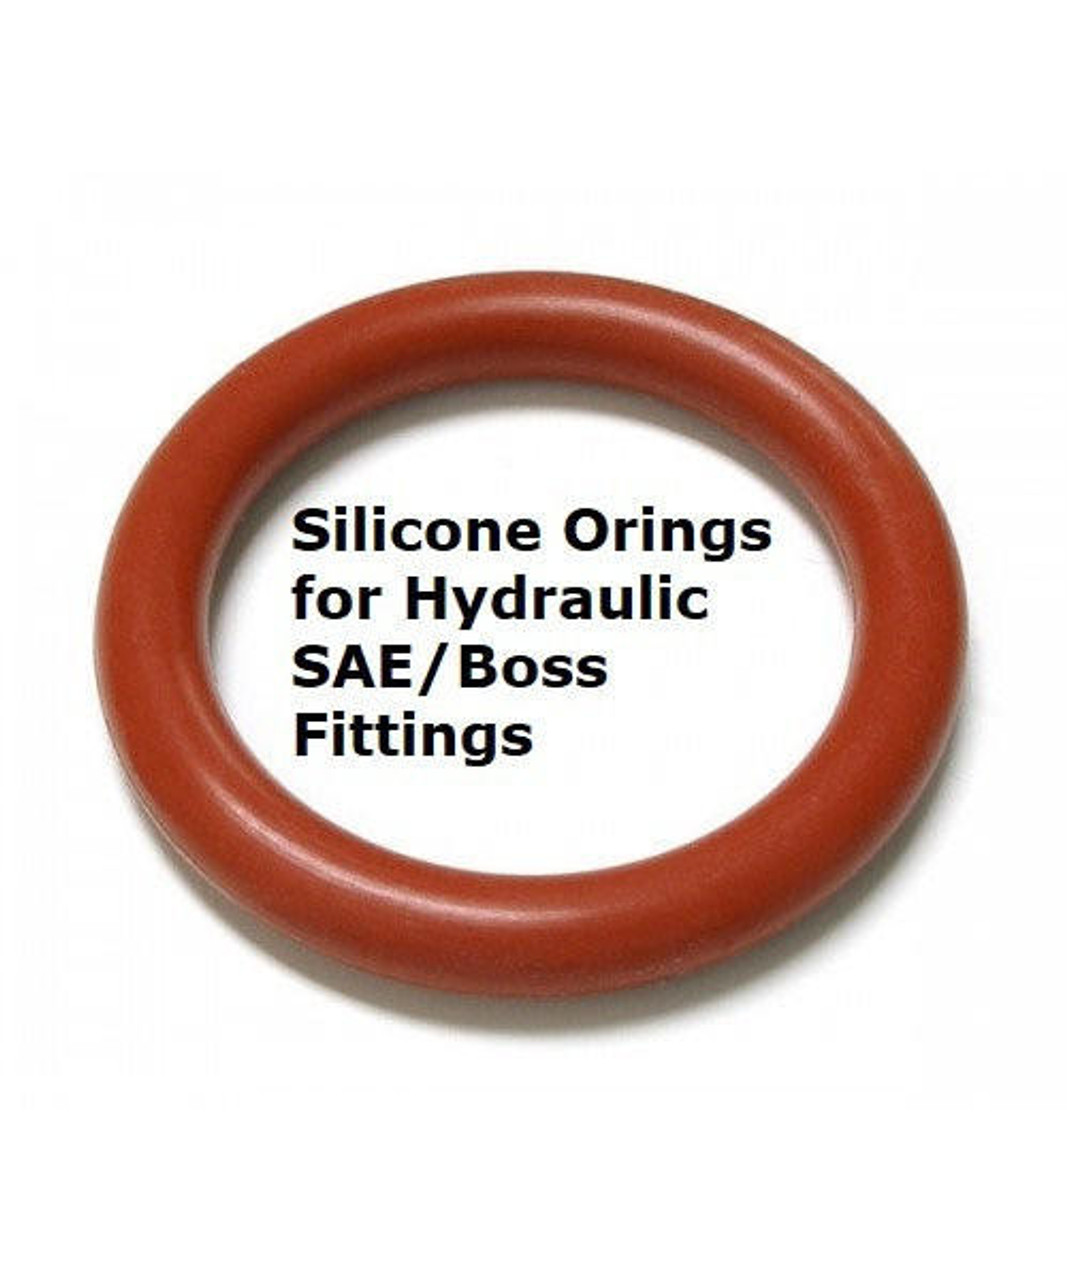 Silicone Orings for SAE/BOSS threads #910 Minimum 25 pcs